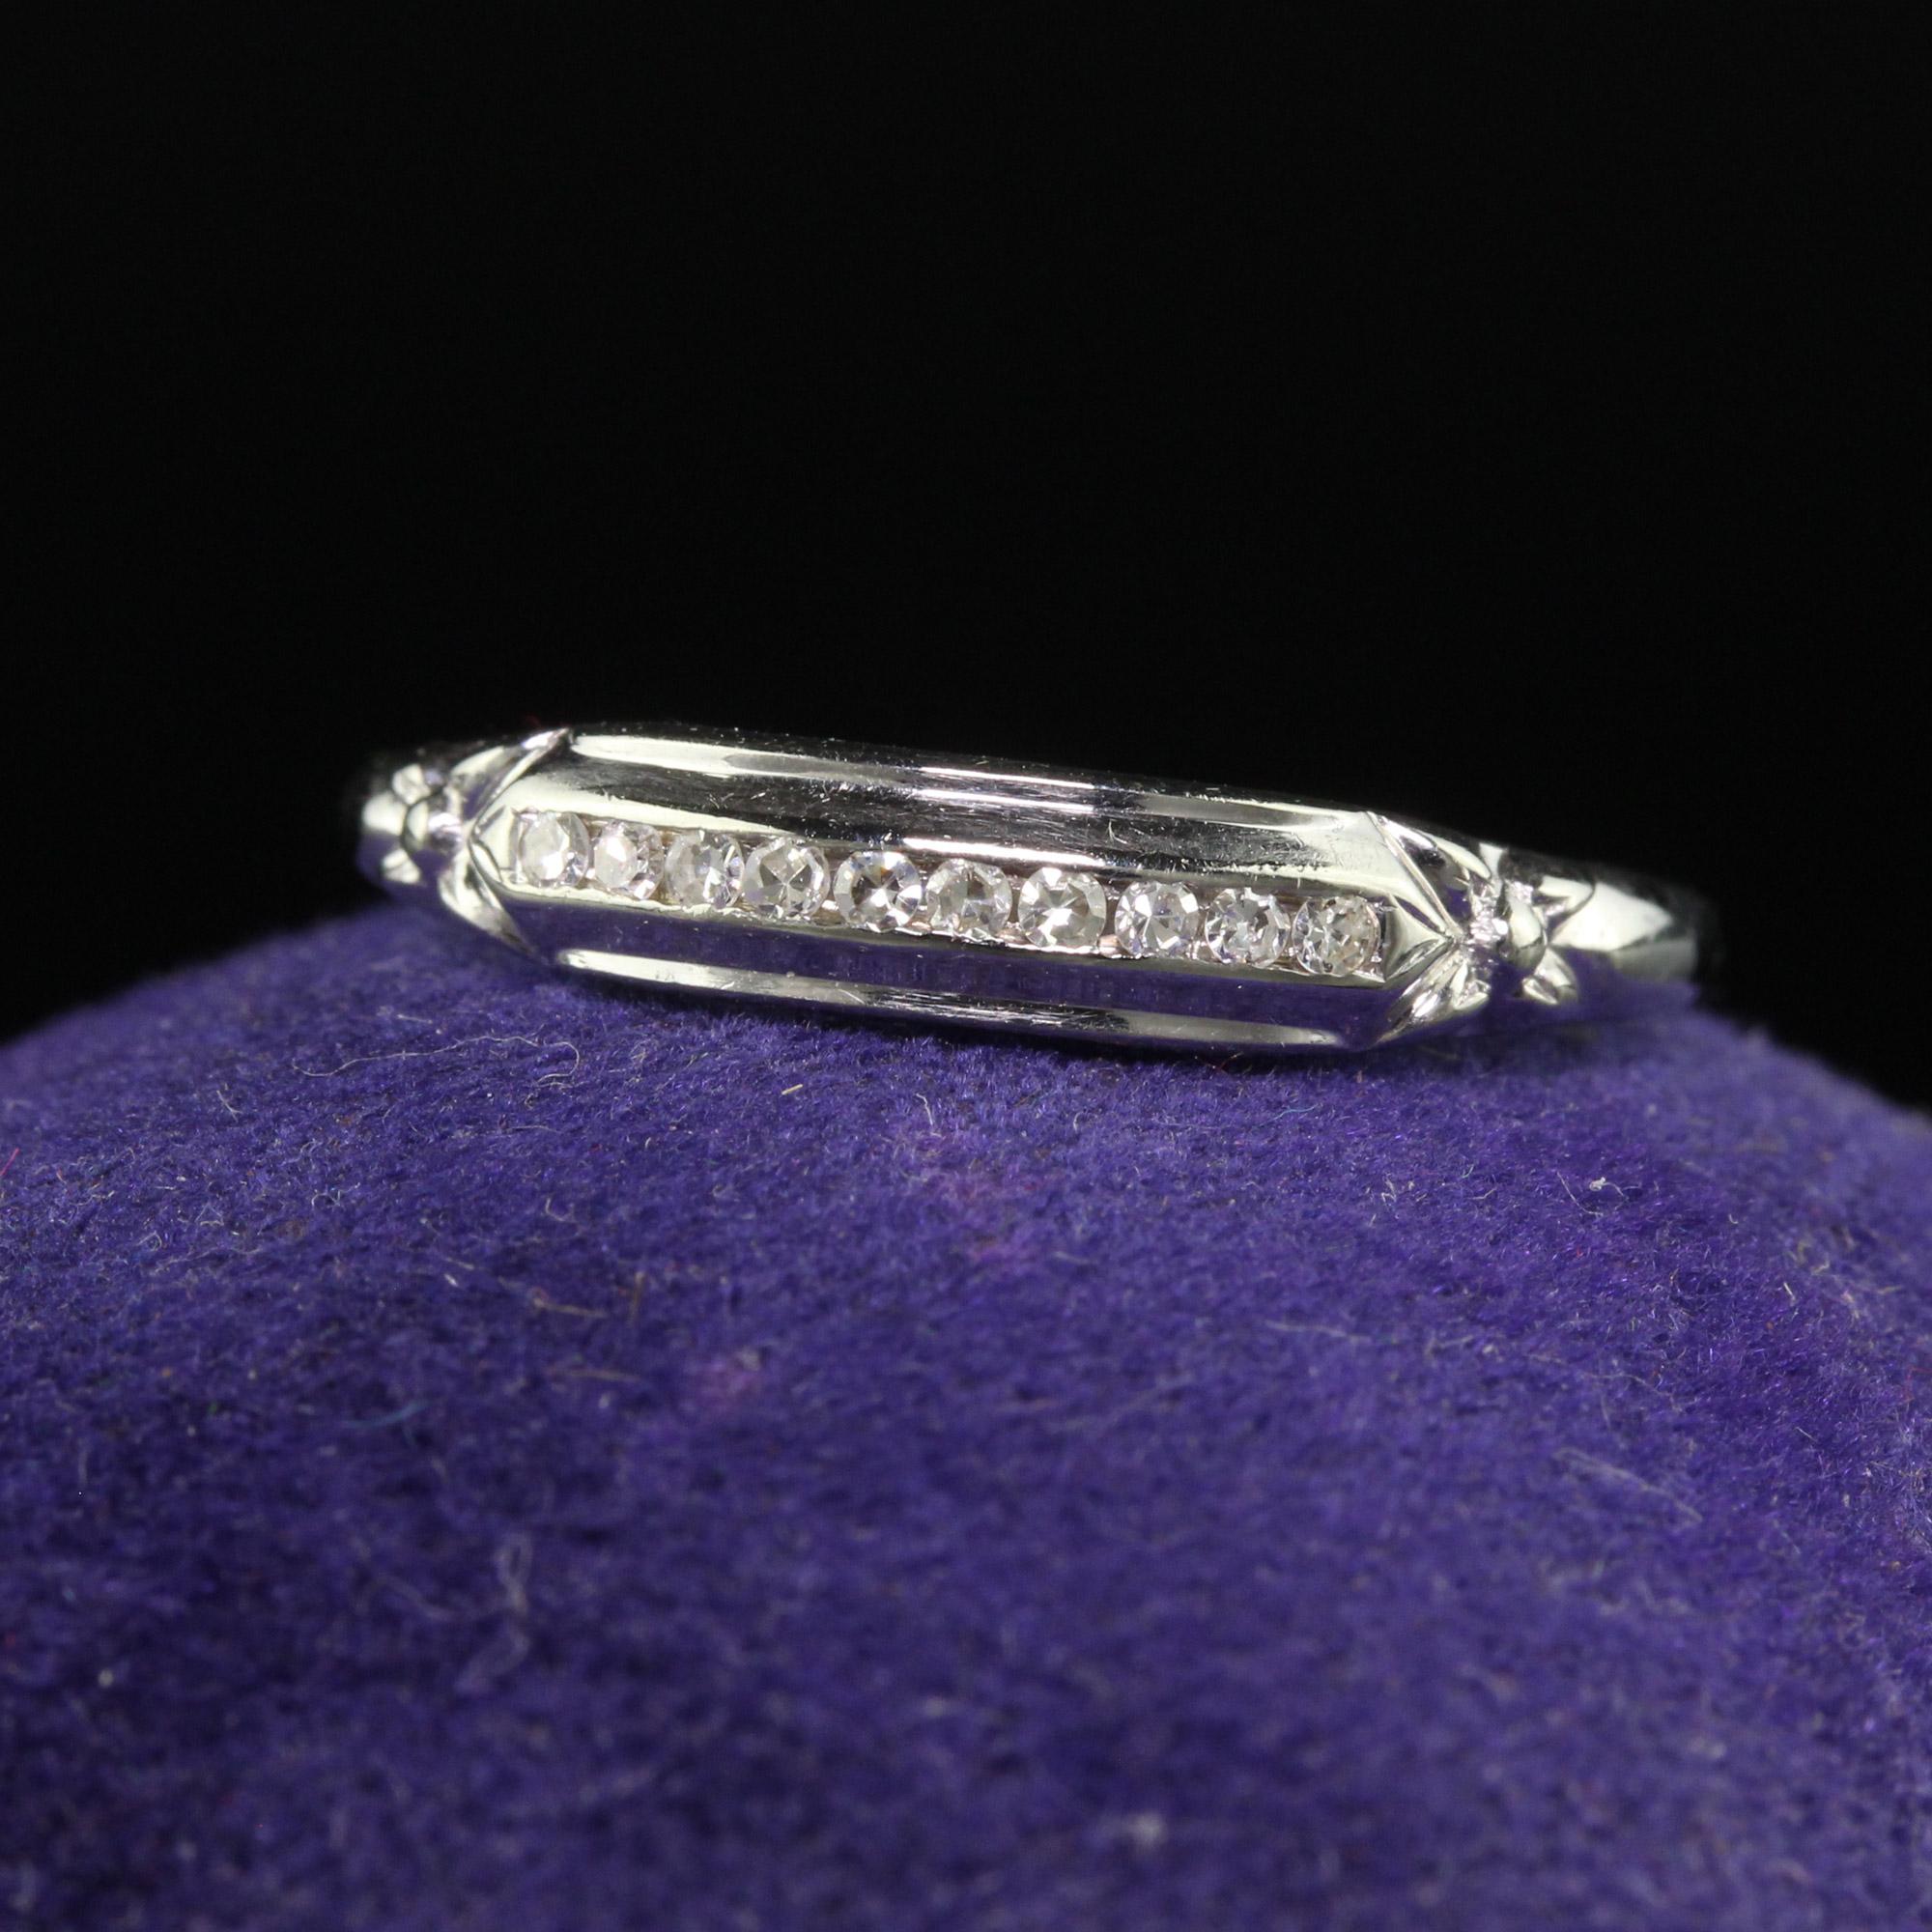 Beautiful Antique Art Deco 18K White Gold Single Cut Diamond Wedding Band - Size 6 1/2. This gorgeous wedding band is crafted in 18k white gold. The top has single cut diamonds set across it with floral accents on each side. The ring is in good